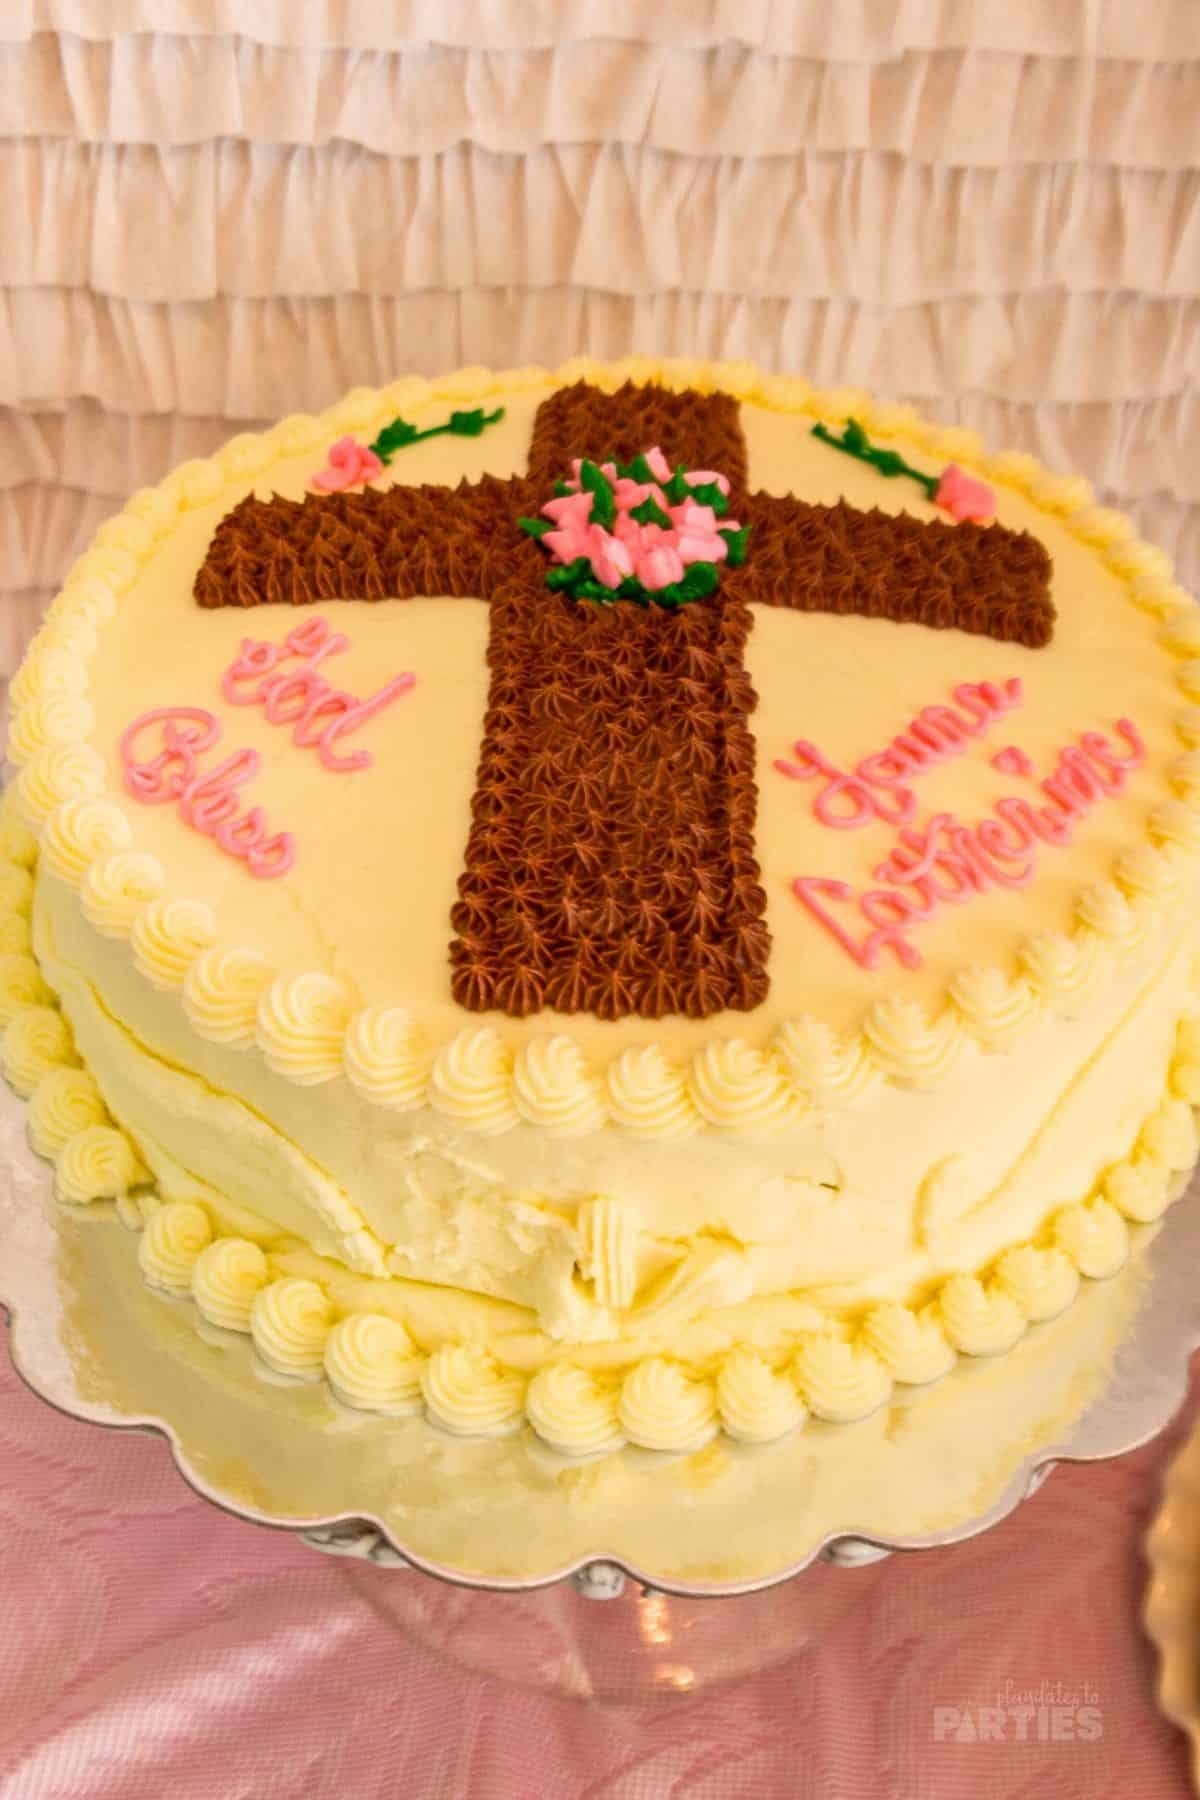 A round cake decorated with a butterceam cross.